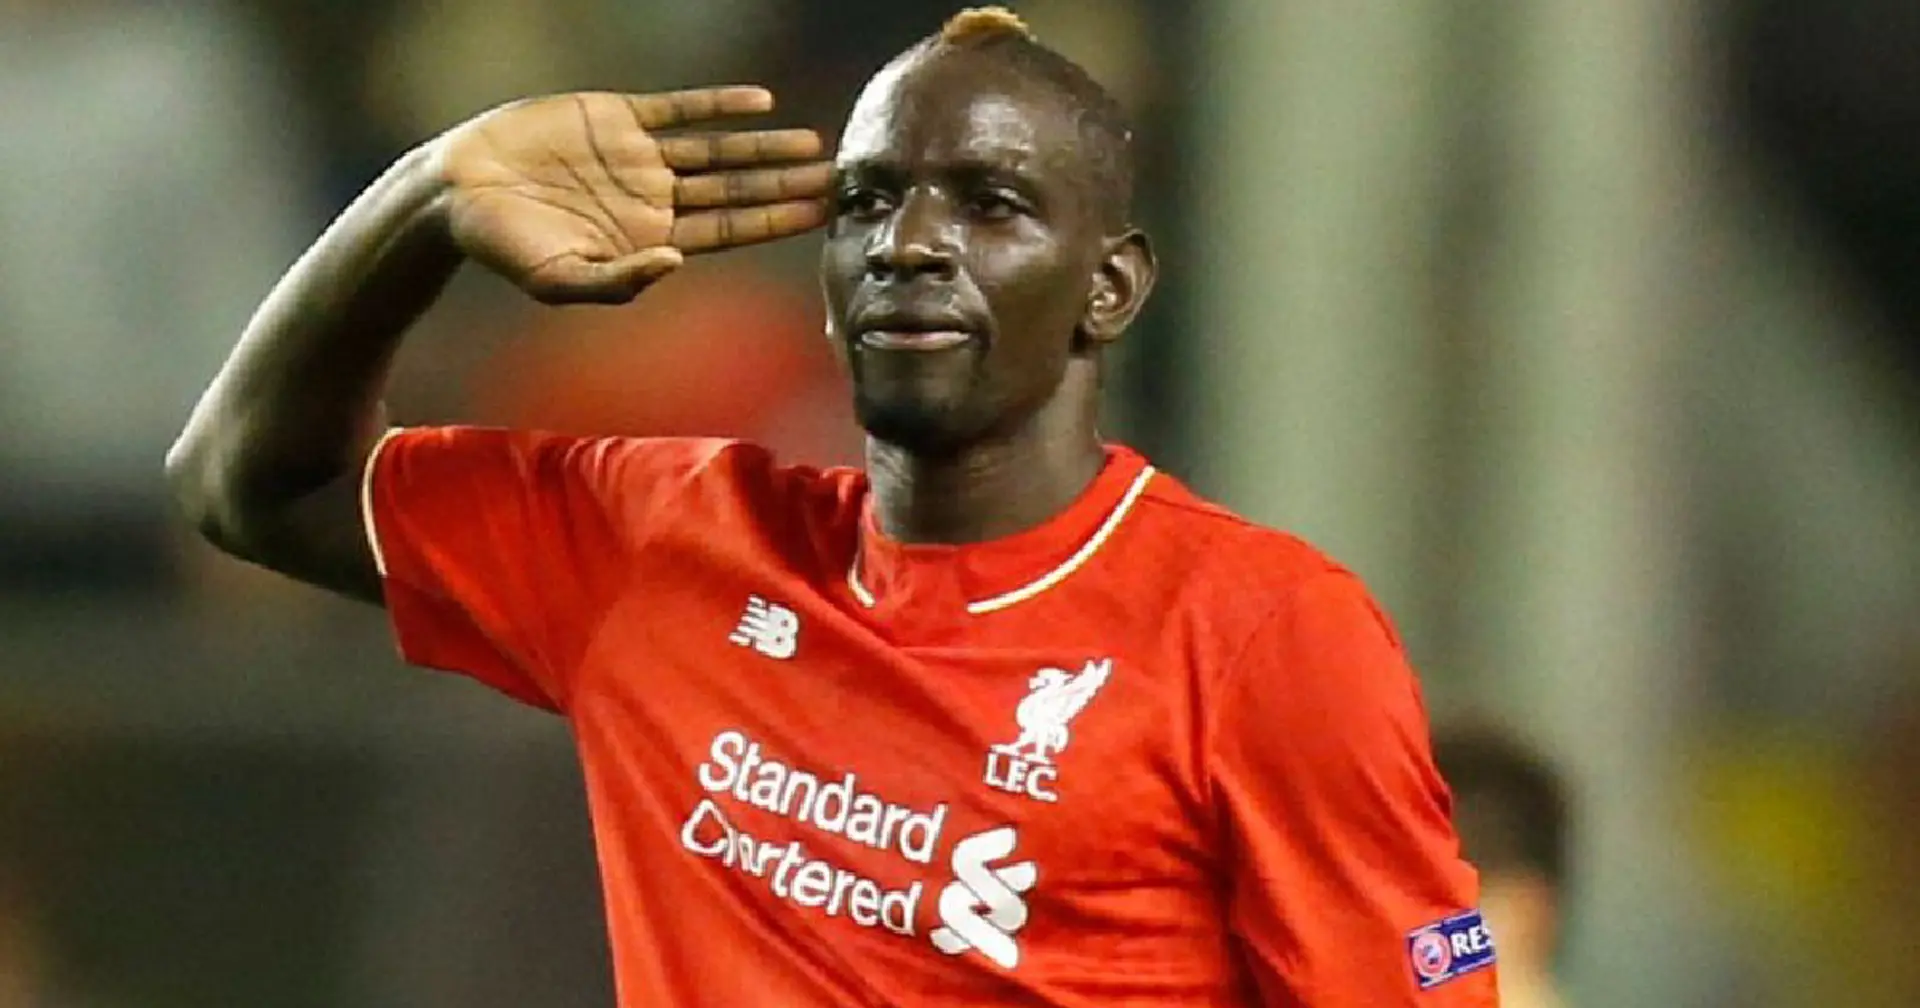 'I lived exceptional moments': Mamadou Sakho reveals he has no regrets over his Liverpool career